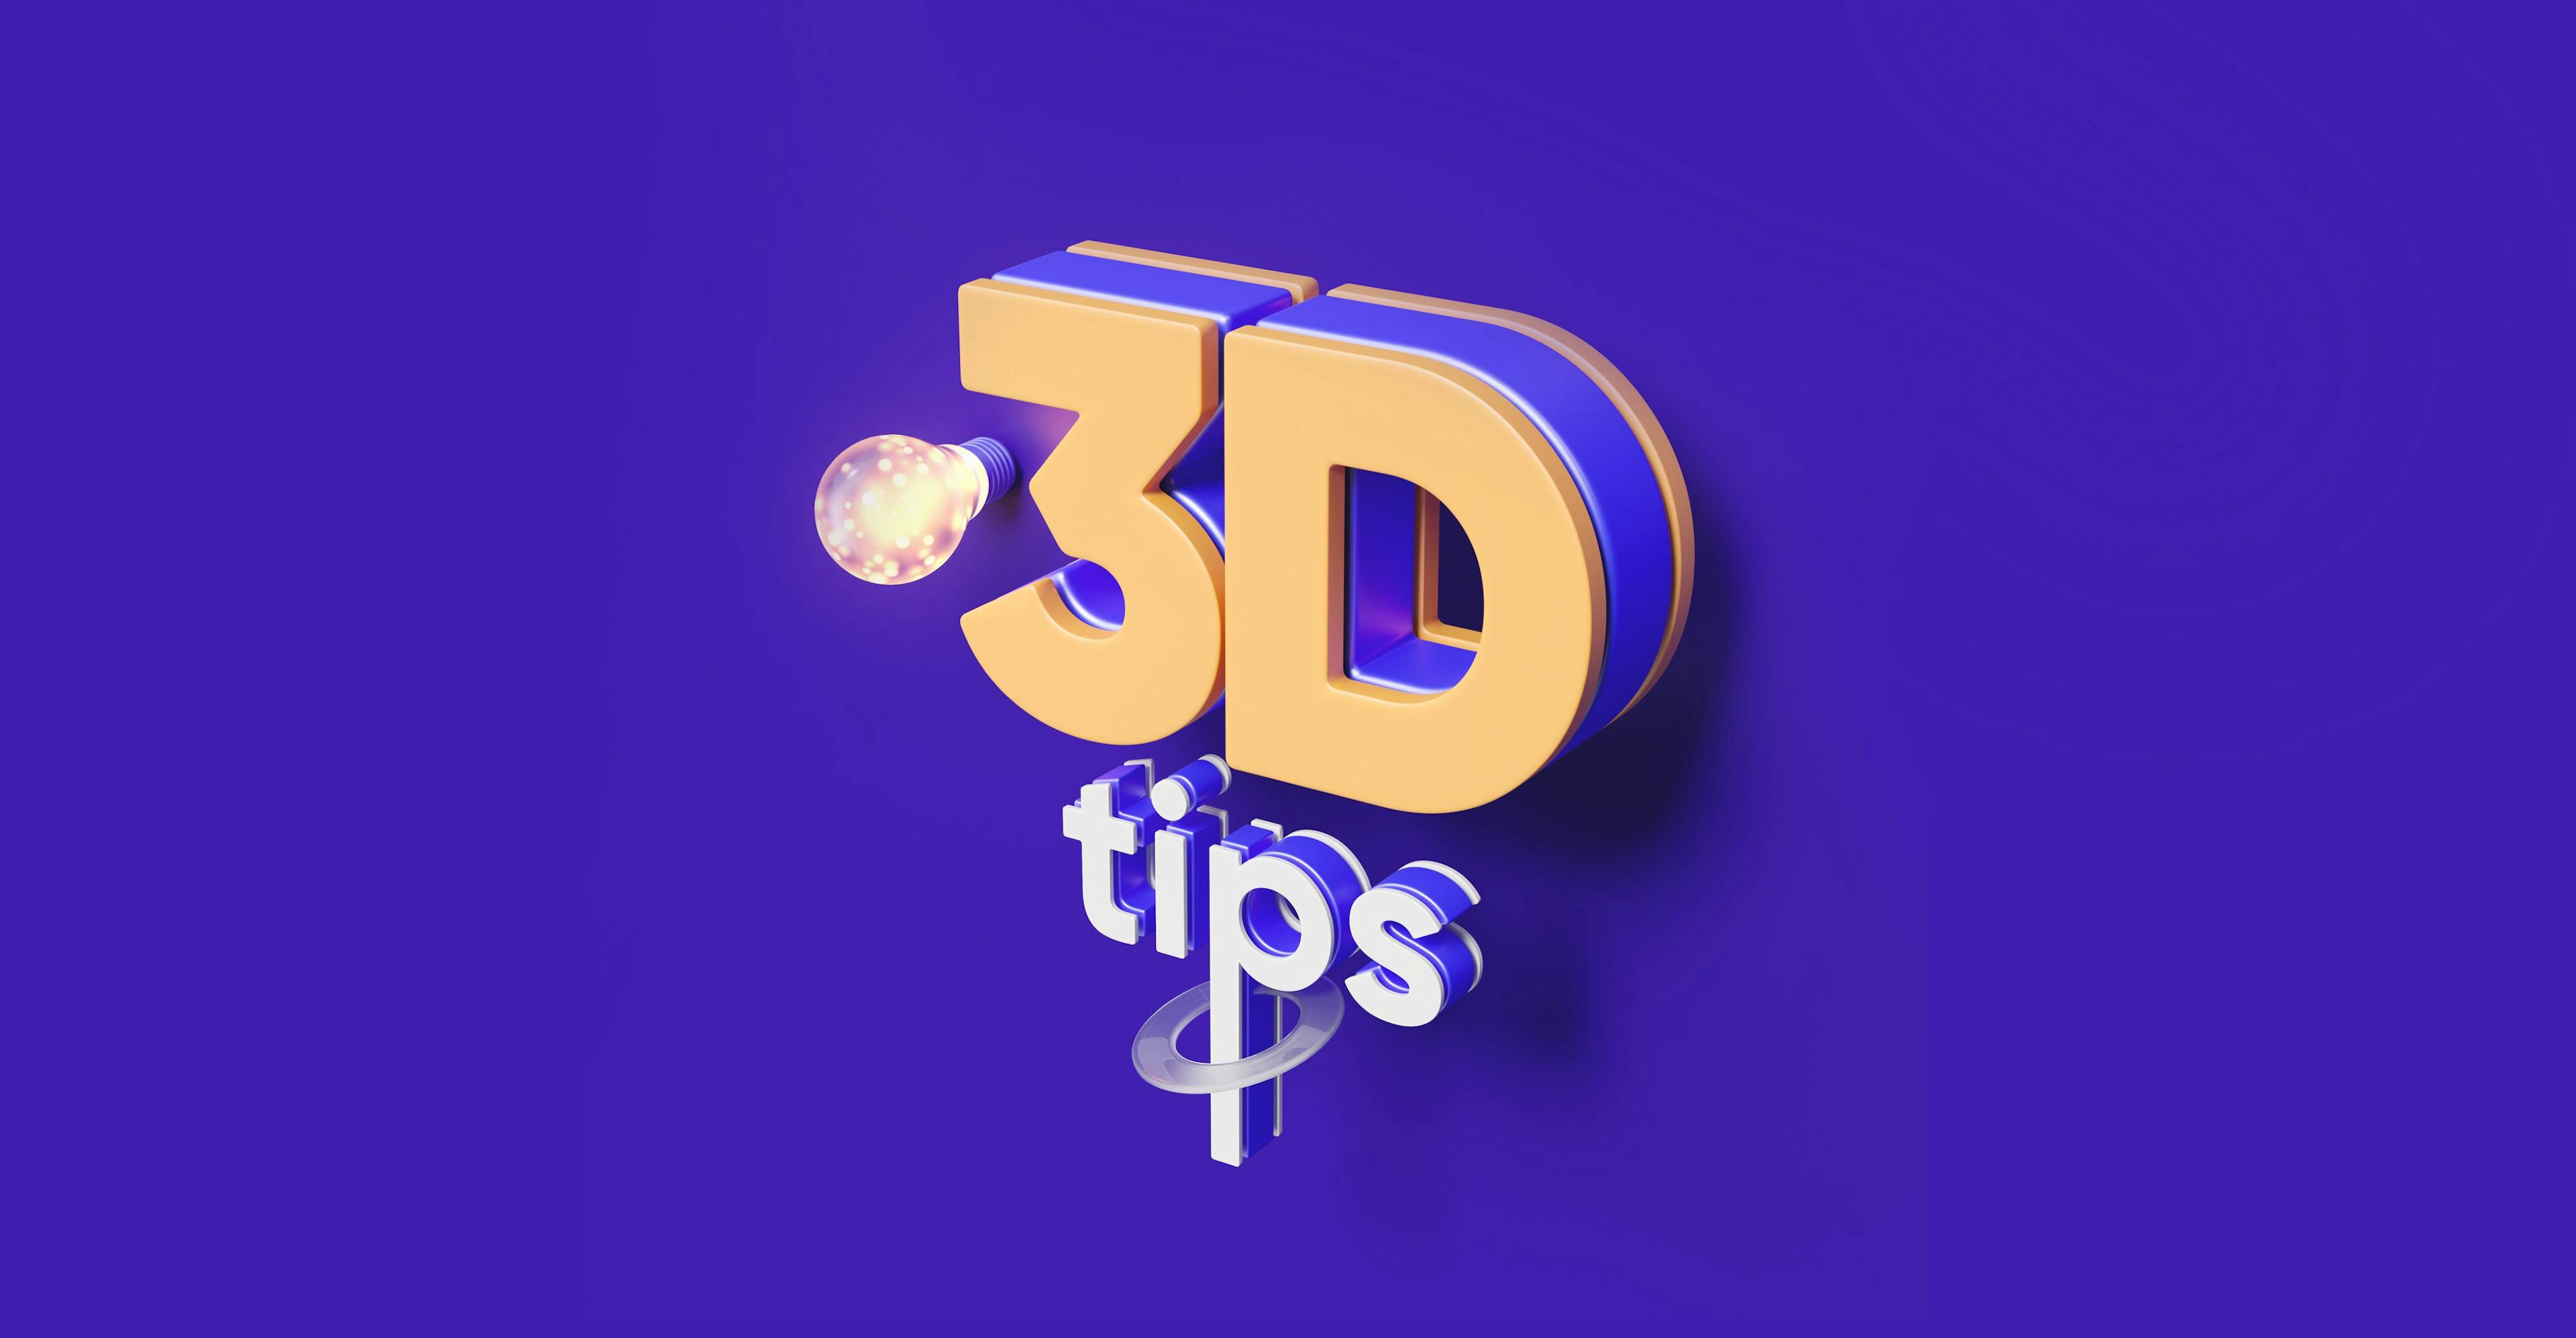 featured image - Sculpting the 3D World: 9 Simple 3D Design Tips for Absolute Beginners